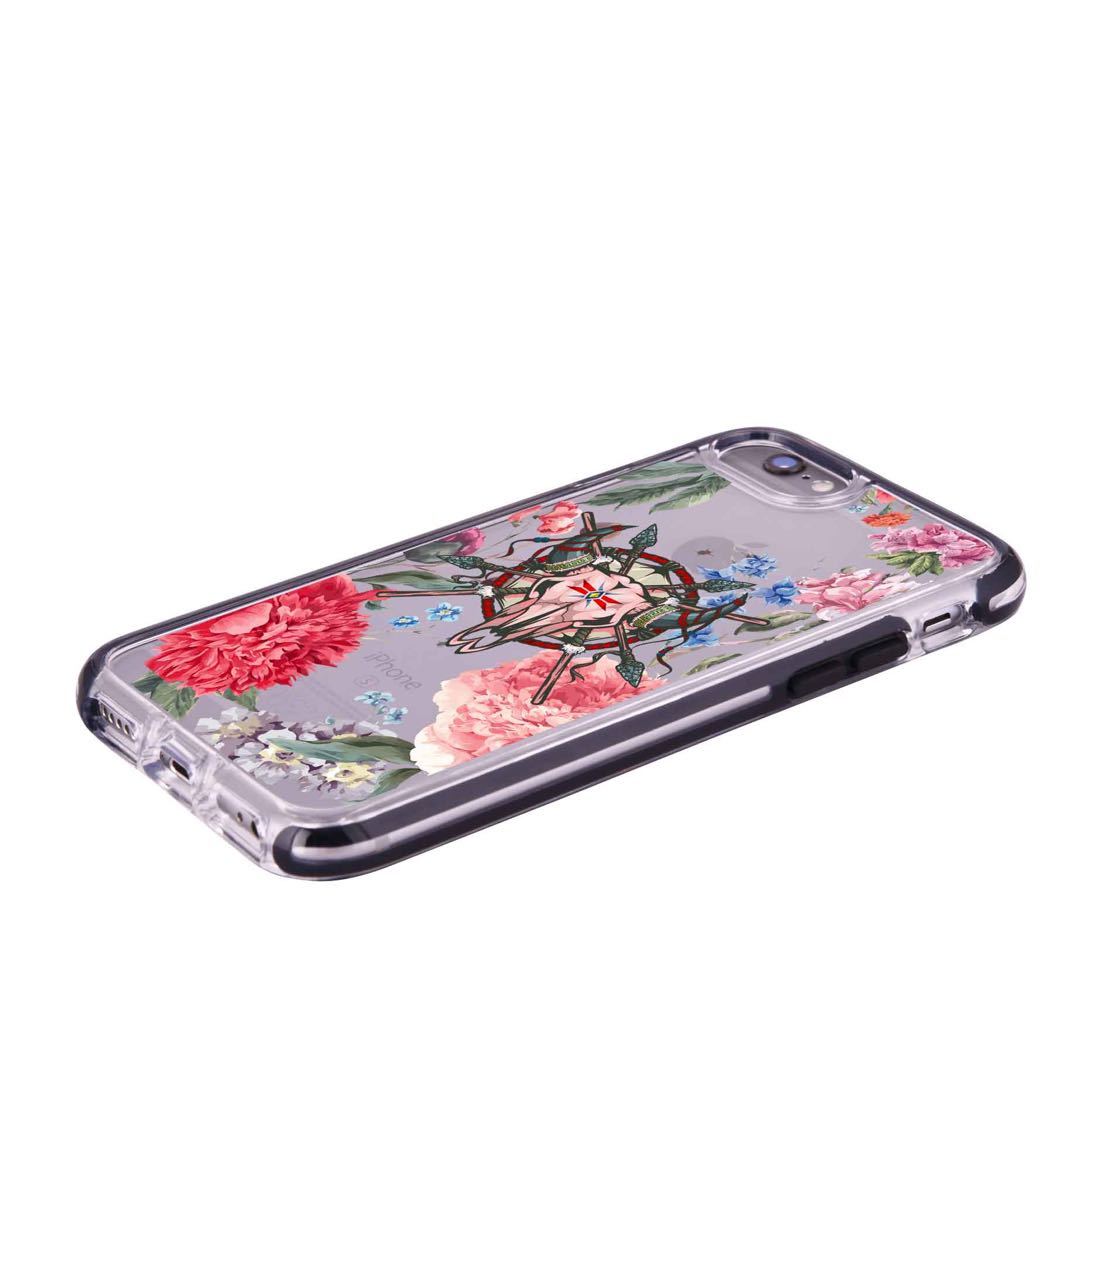 Floral Symmetry - Extreme Phone Case for iPhone 6S